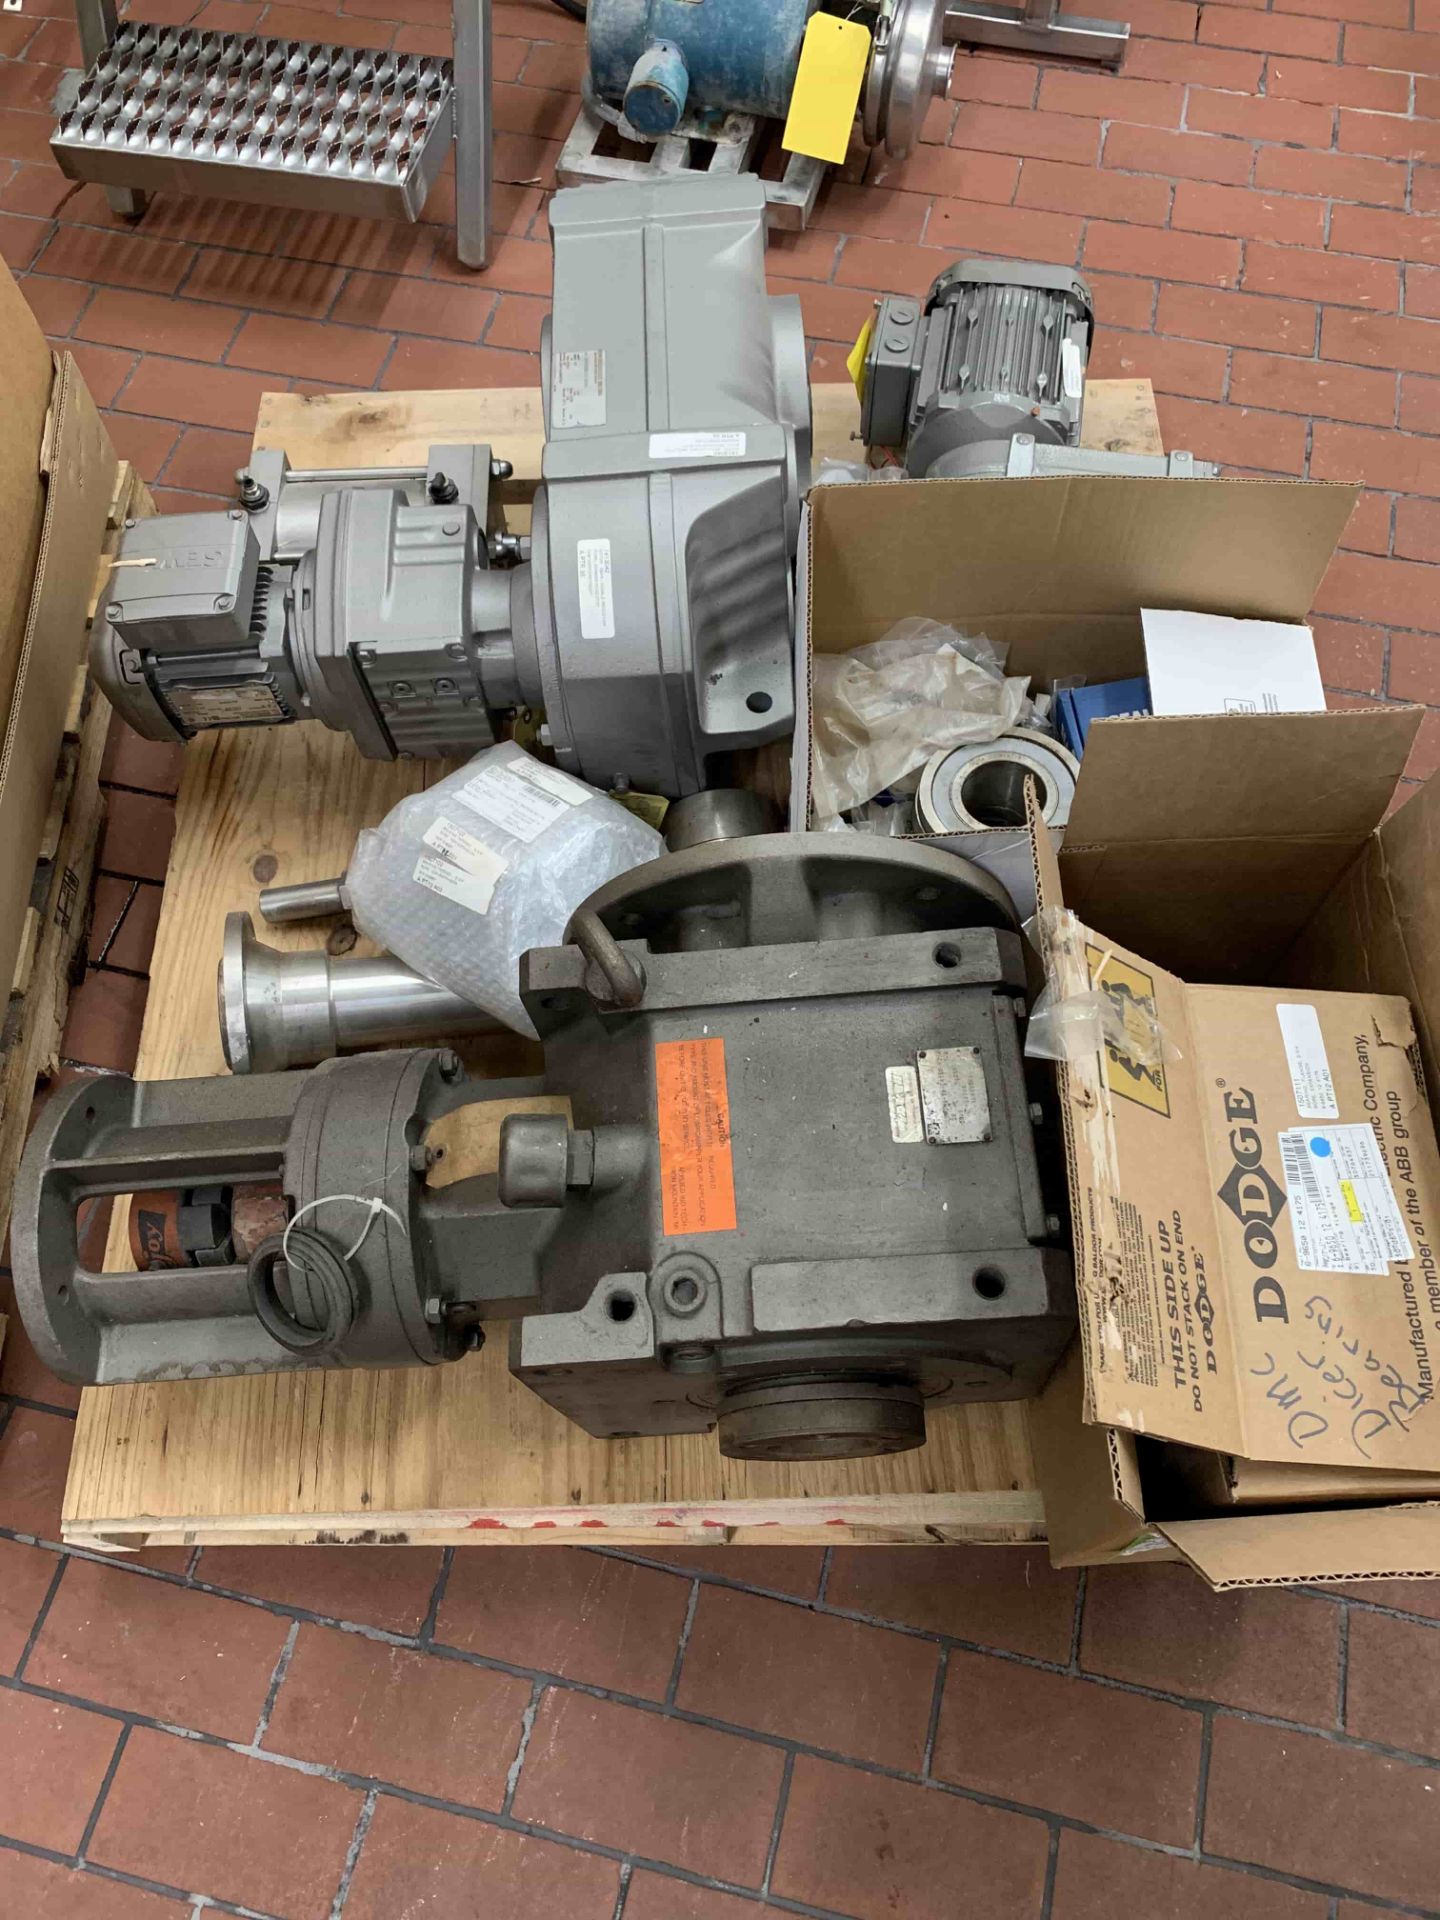 NEW DMC Spare Belts, Spare Drives and Spare Parts Rigging Fee: $200 *LOCATED IN: Kiel, Wisconsin - Bild 3 aus 3